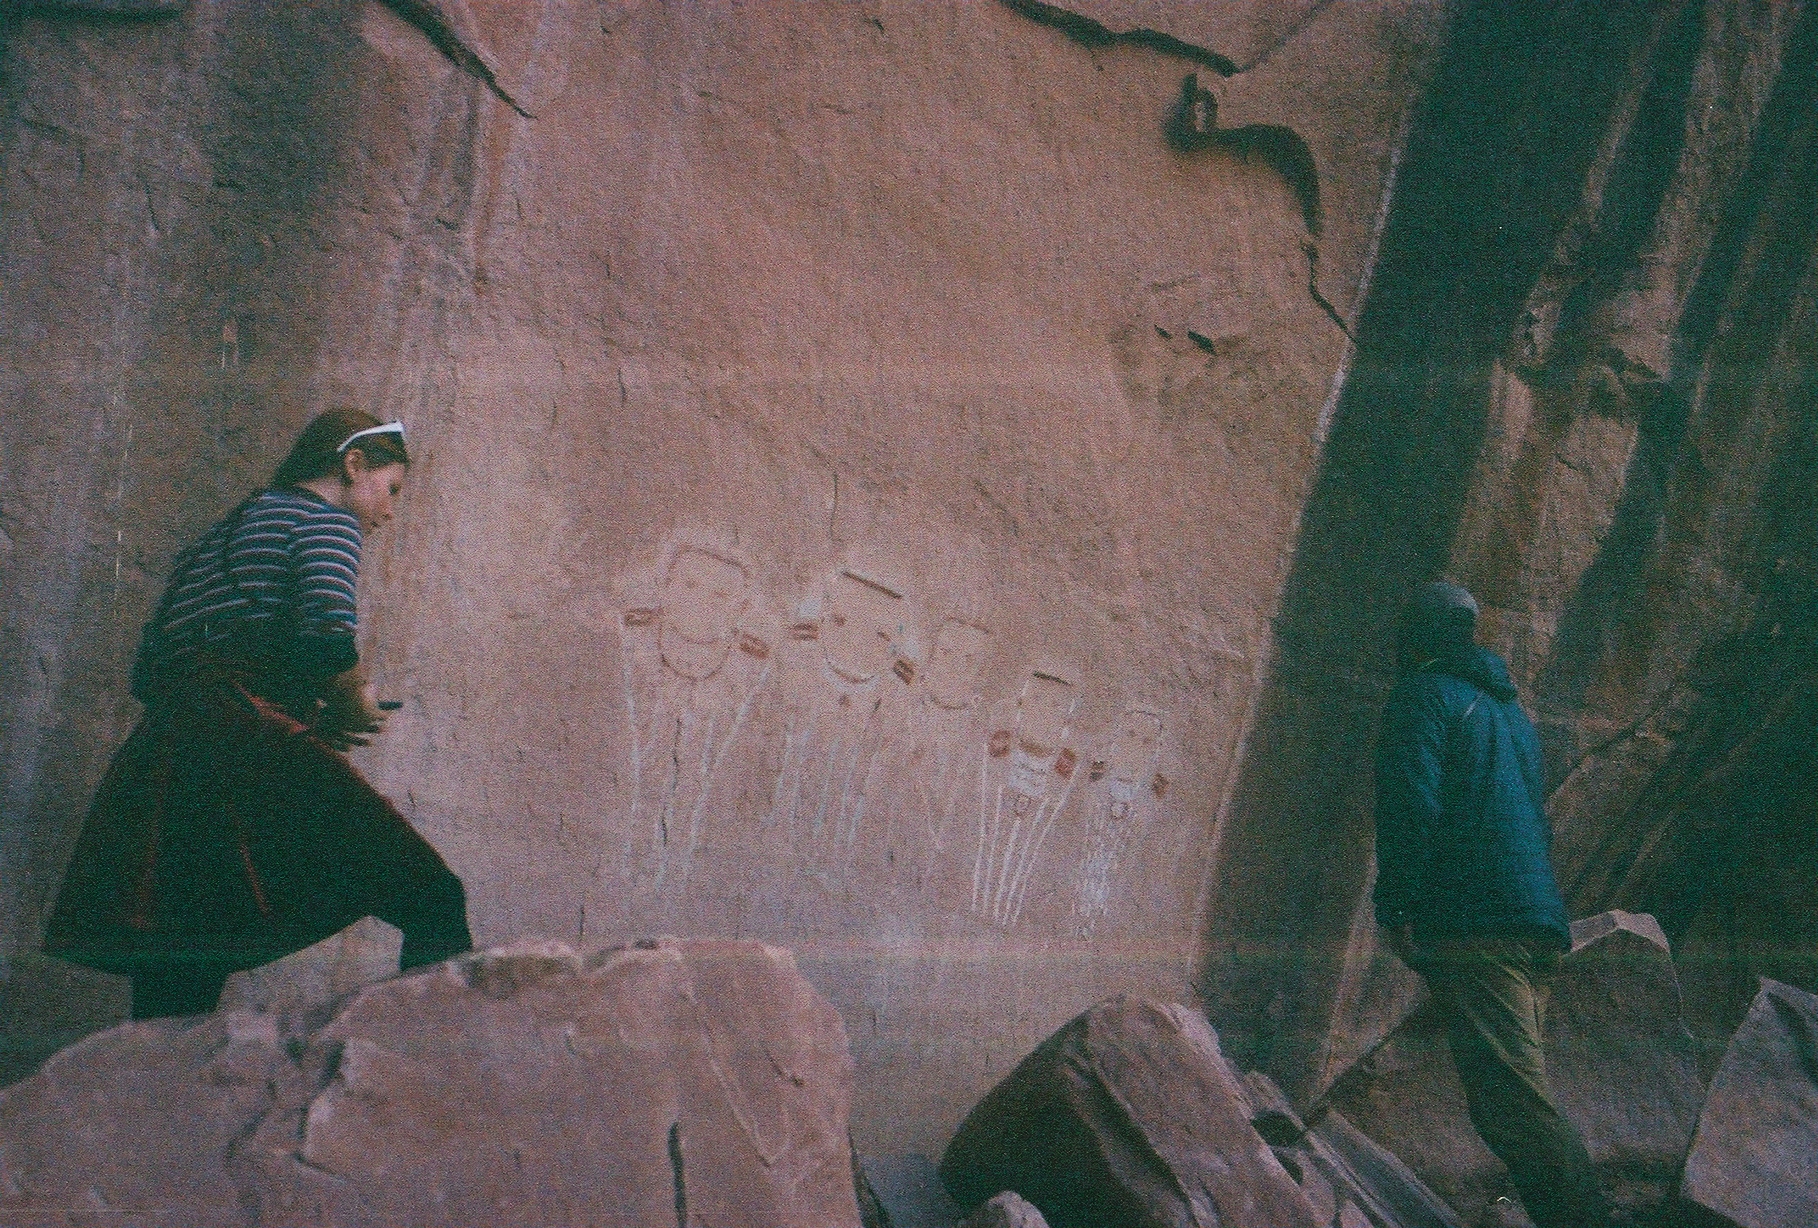 a man and a woman look at rock art painted on a sandstone wall